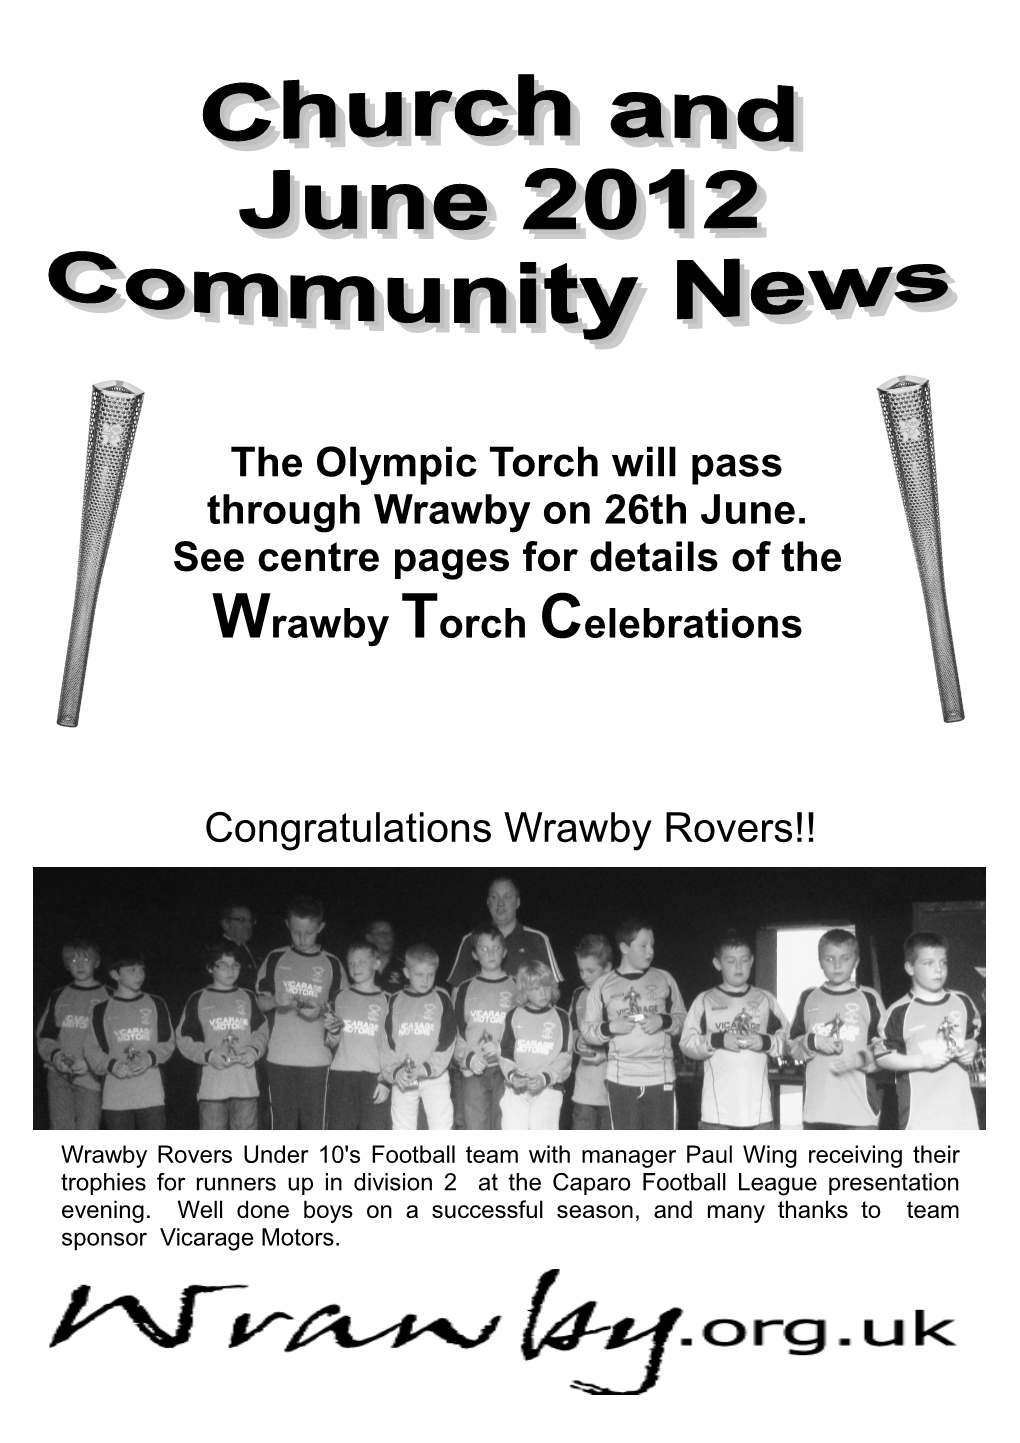 The Olympic Torch Will Pass Through Wrawby on 26Th June. See Centre Pages for Details of the Wrawby Torch Celebrations